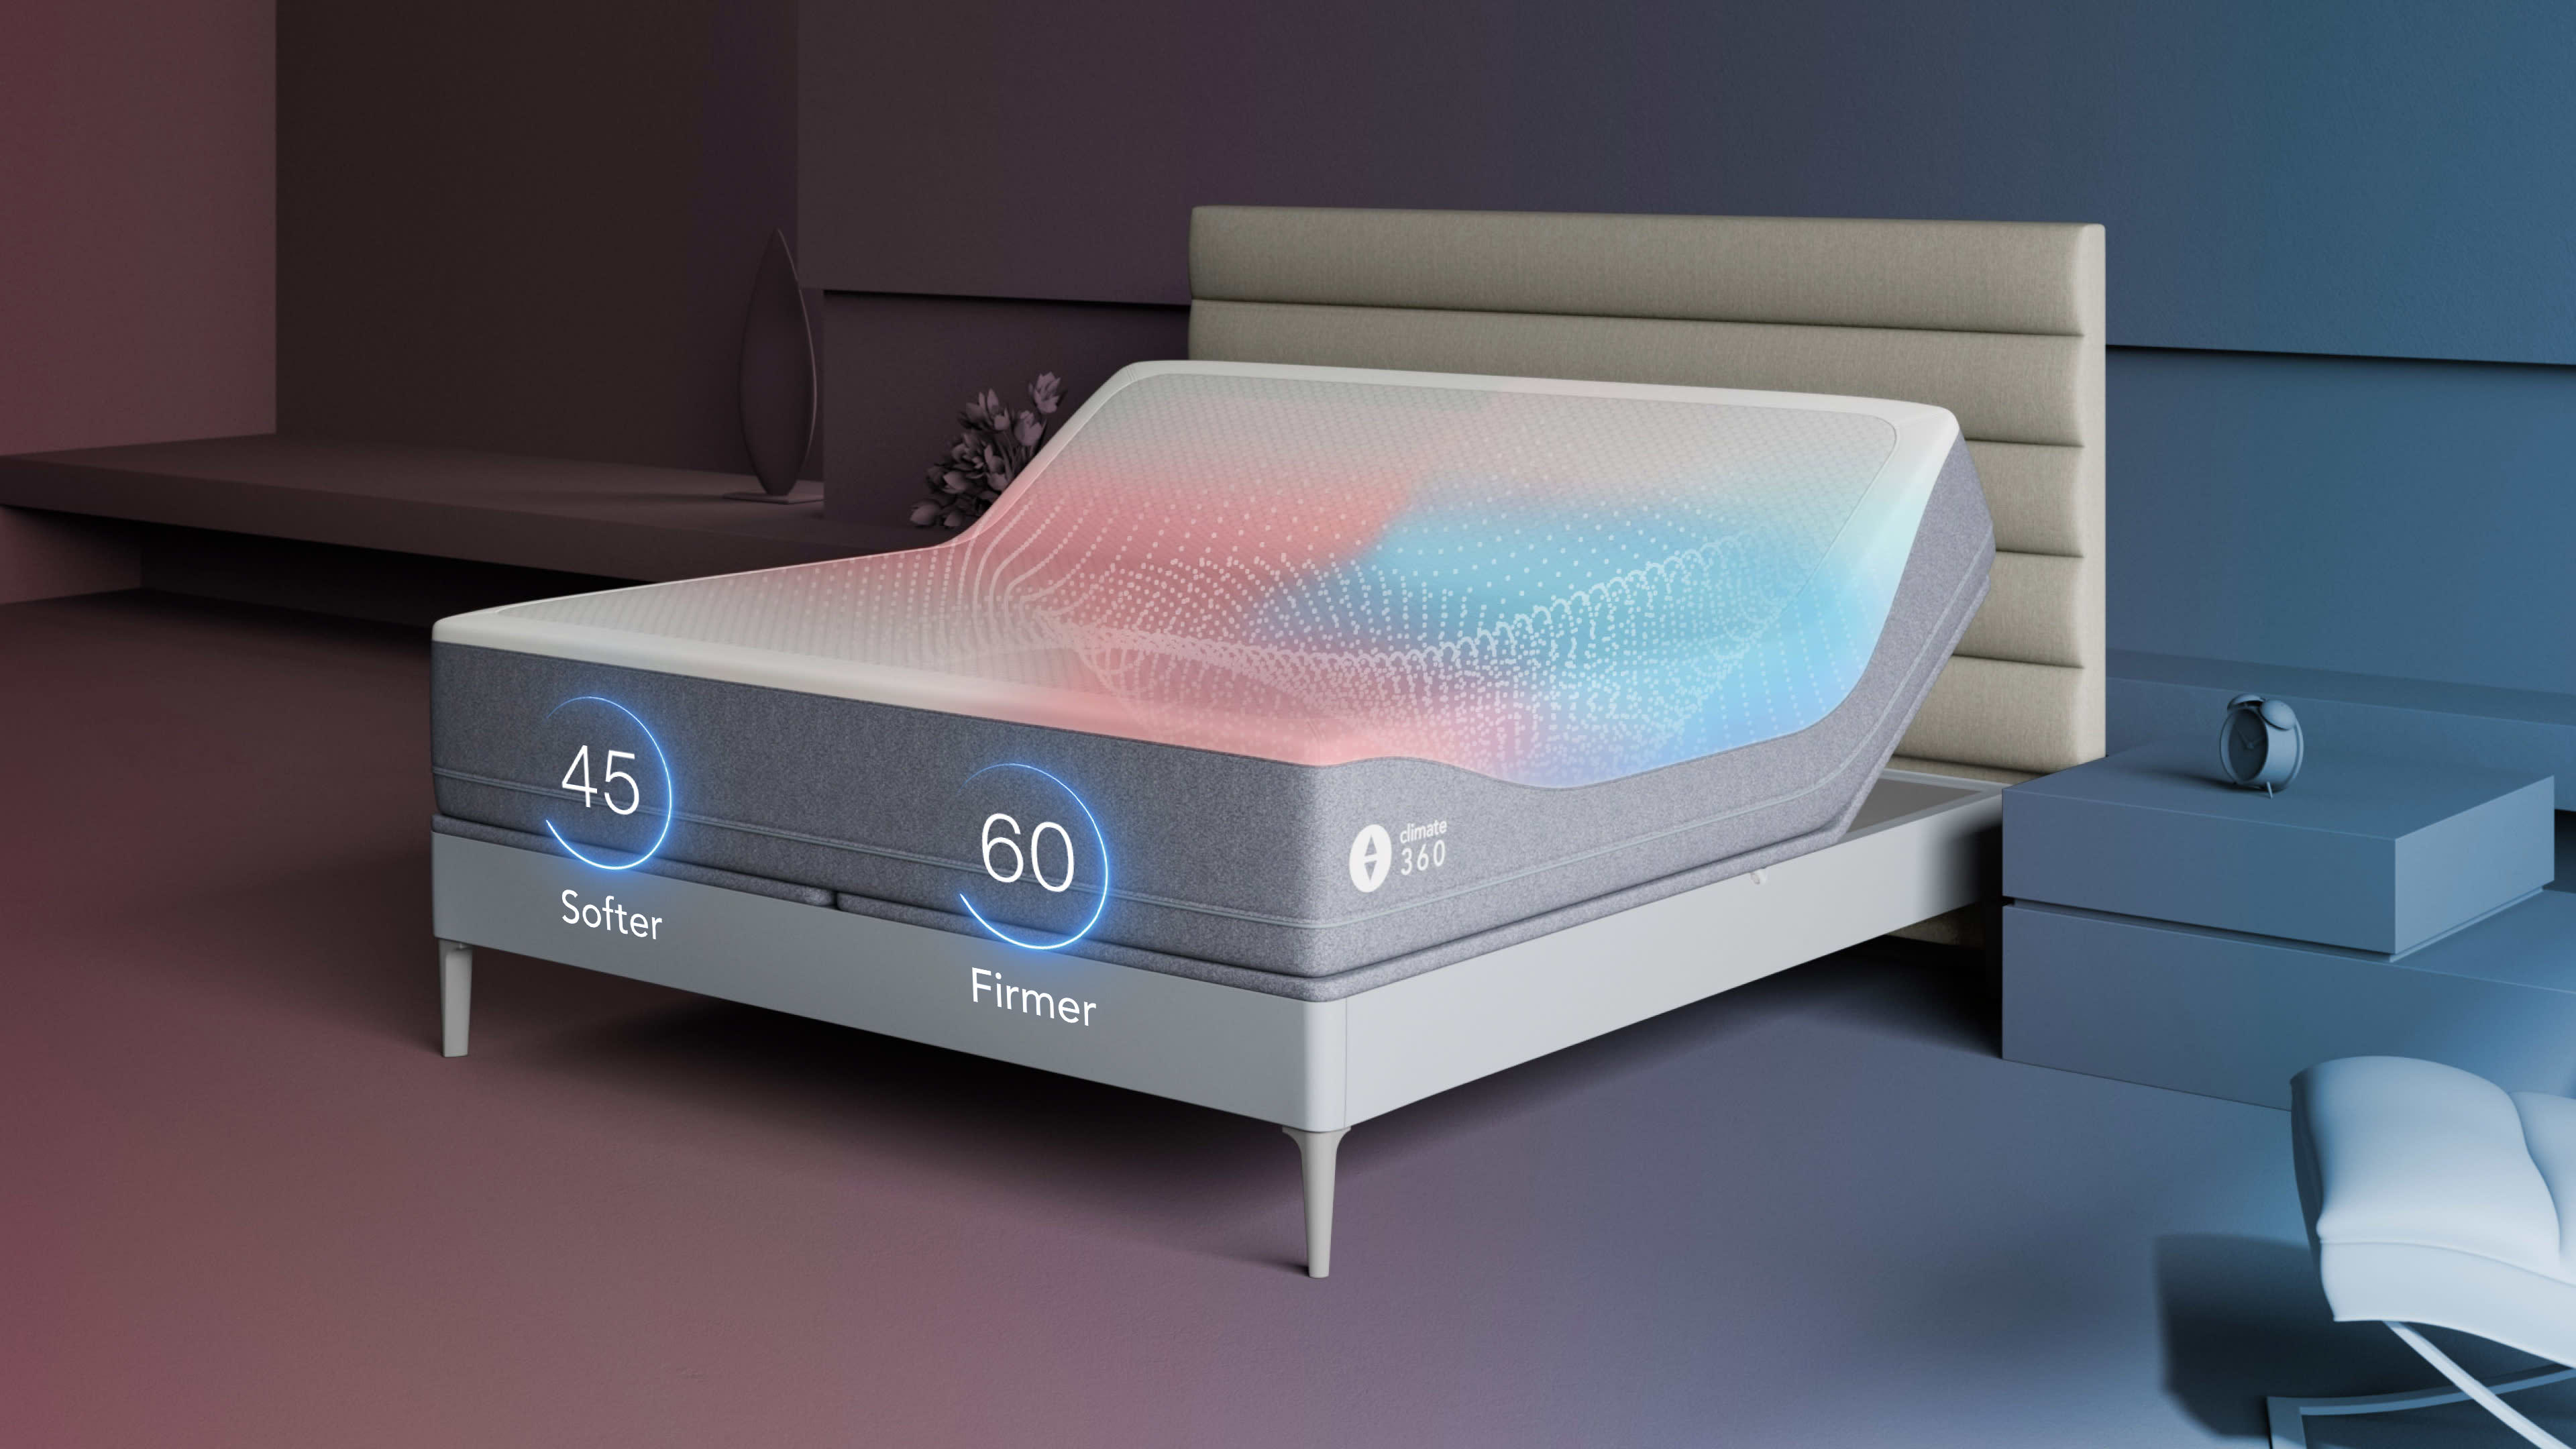 https://cdn.sleepnumber.com/image/upload/f_auto,q_auto:eco/v1704520984/workarea/catalog/product_images/climate360/Climate360_Gallery_45_Numbers